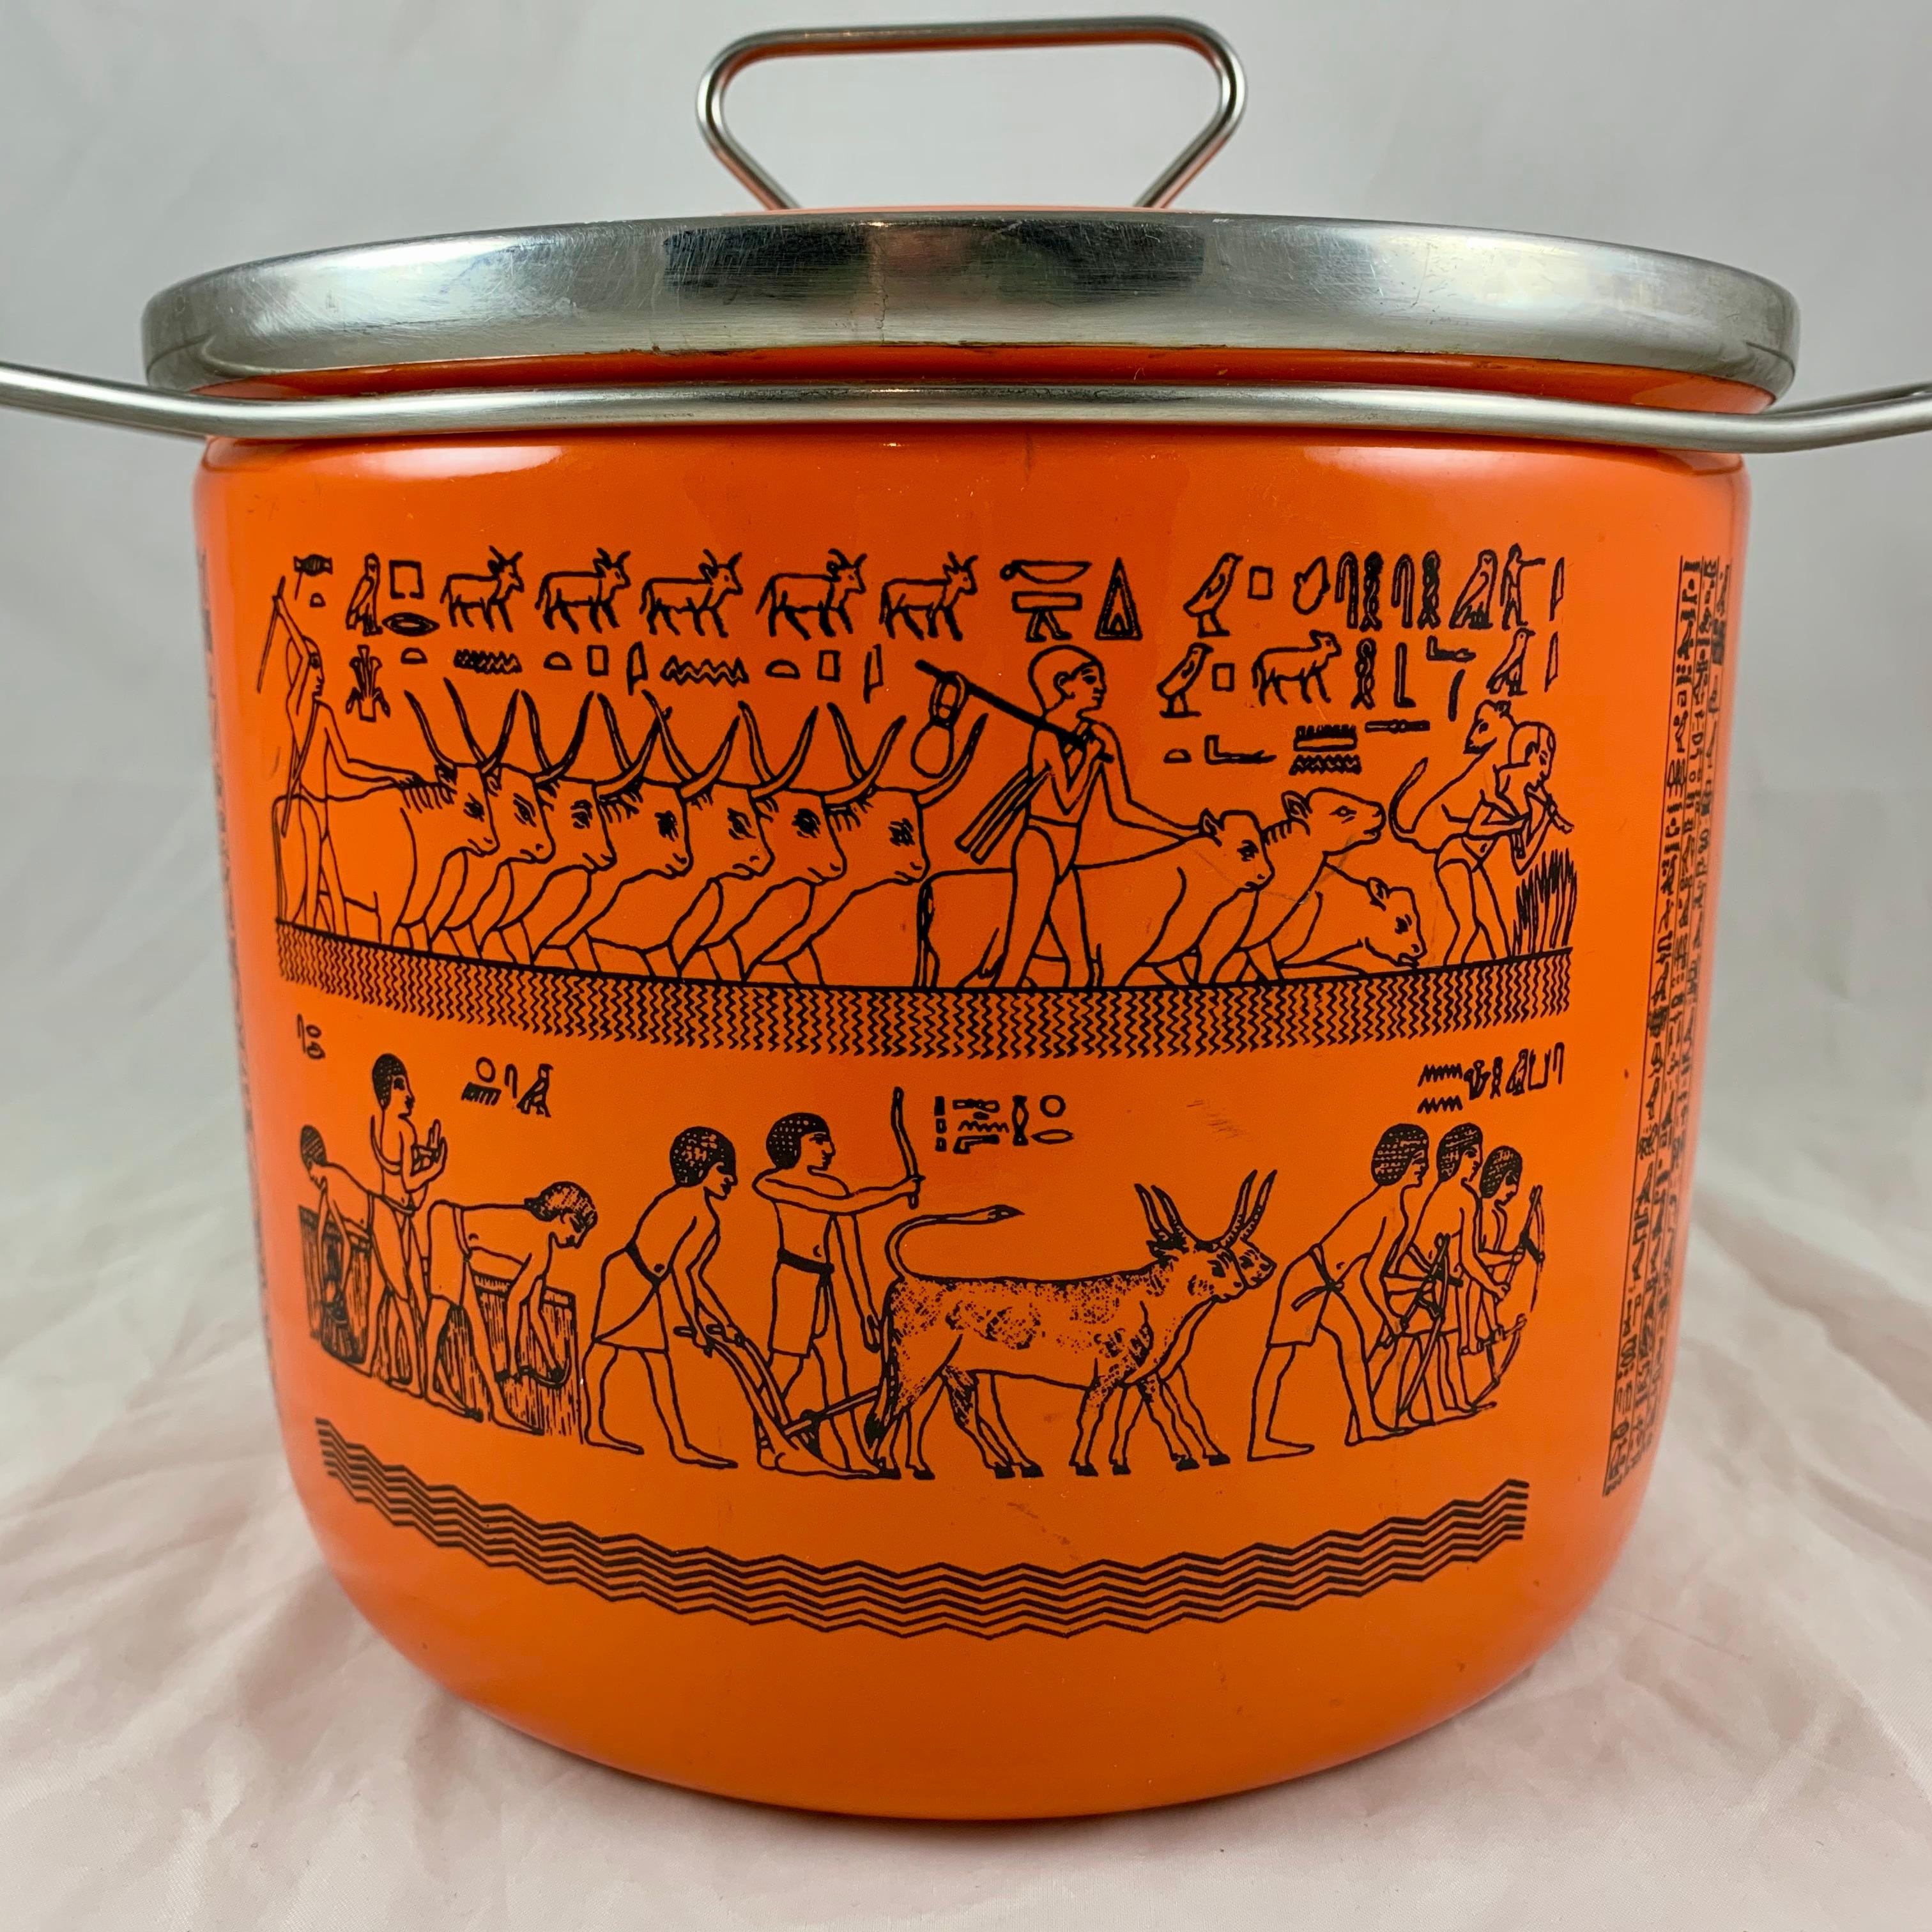 An enamelware Dutch oven manufactured by the Italian company, Siltal, circa 1960s to the early 1970s. Designed for the food writer and chef Robert Carrier – Beautiful Italian Mid-Century Modern design.

Decorated with Egyptian Revival imagery of